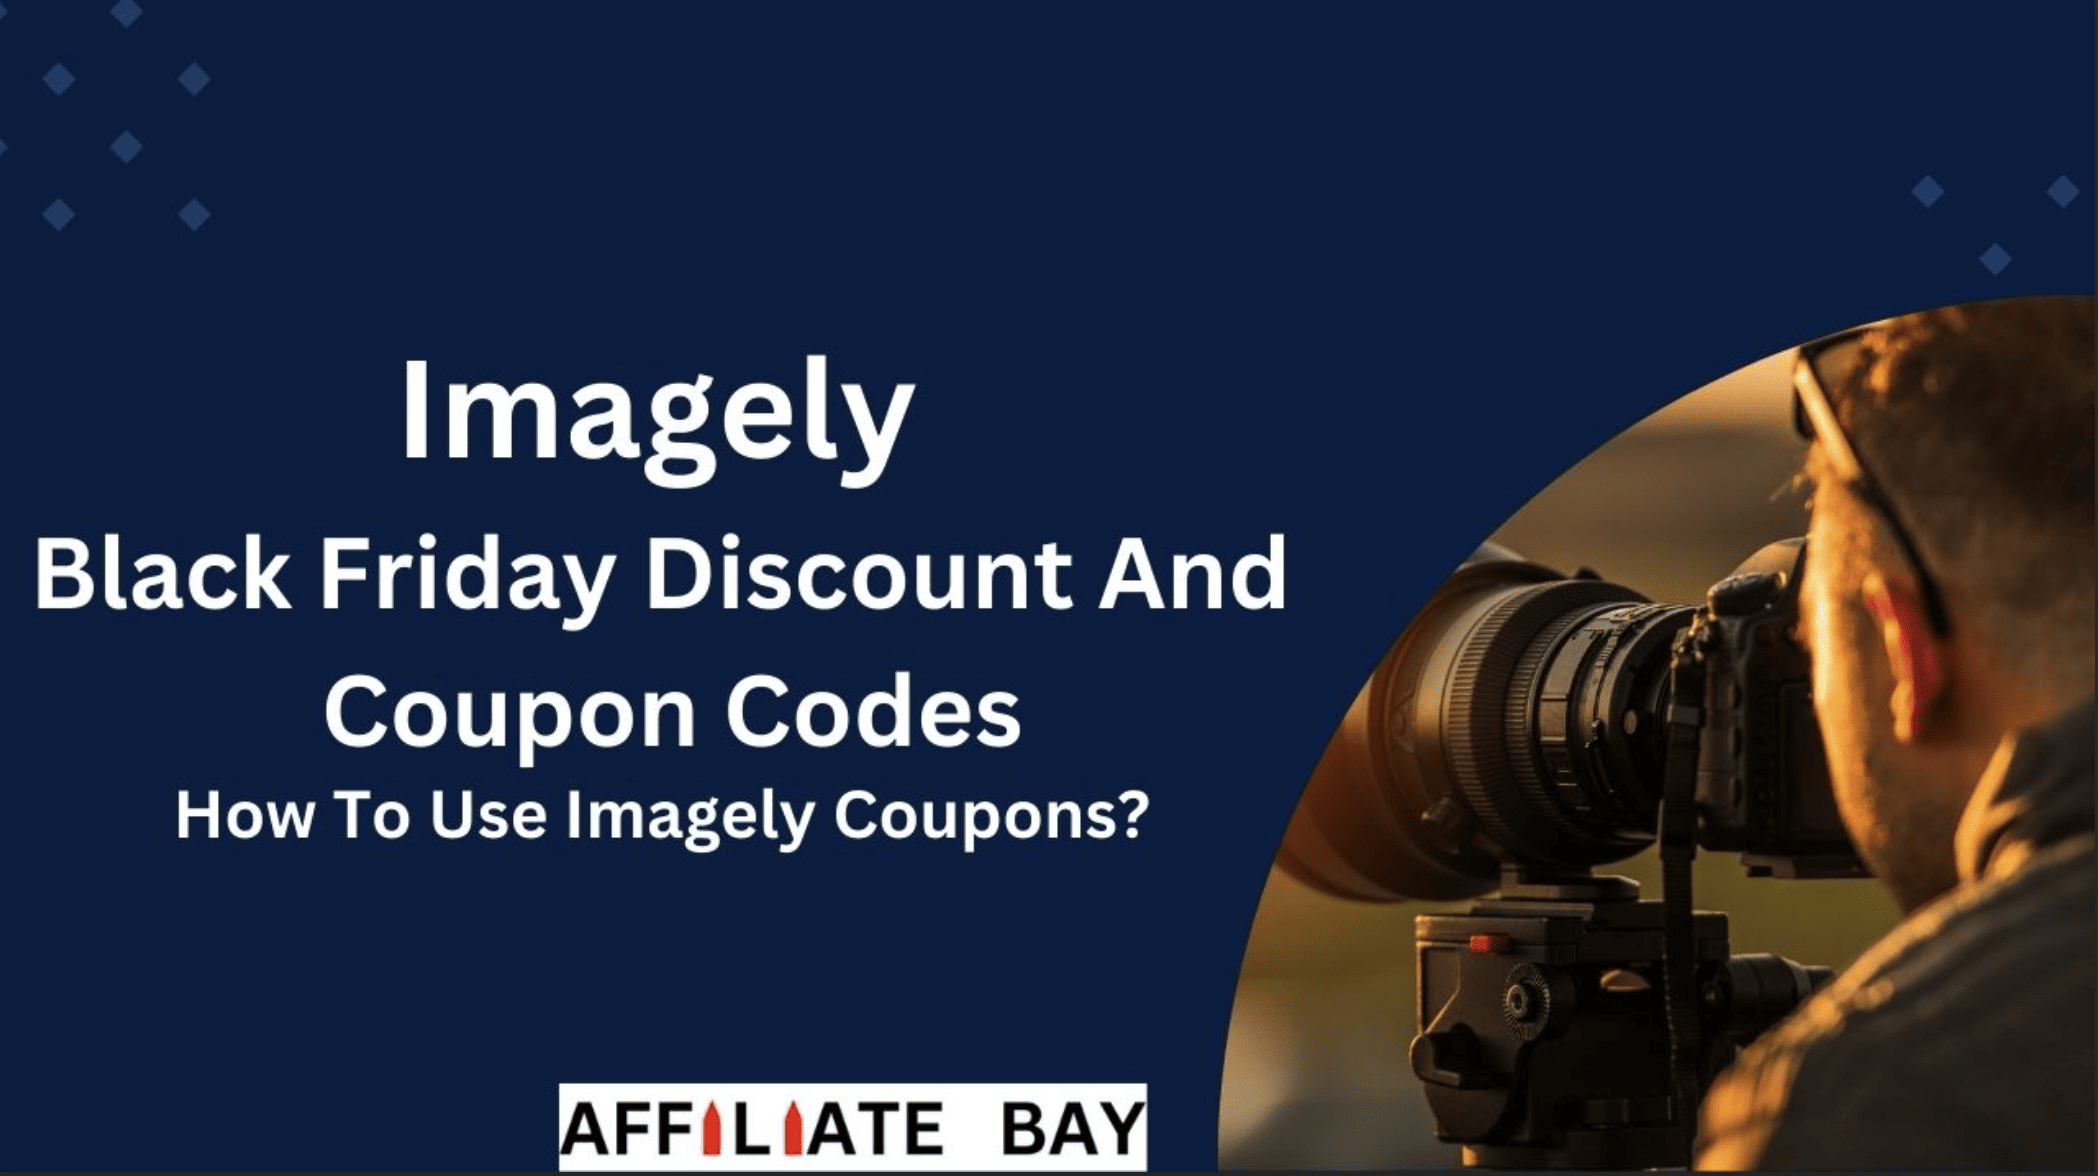 Imagely Black Friday Discount